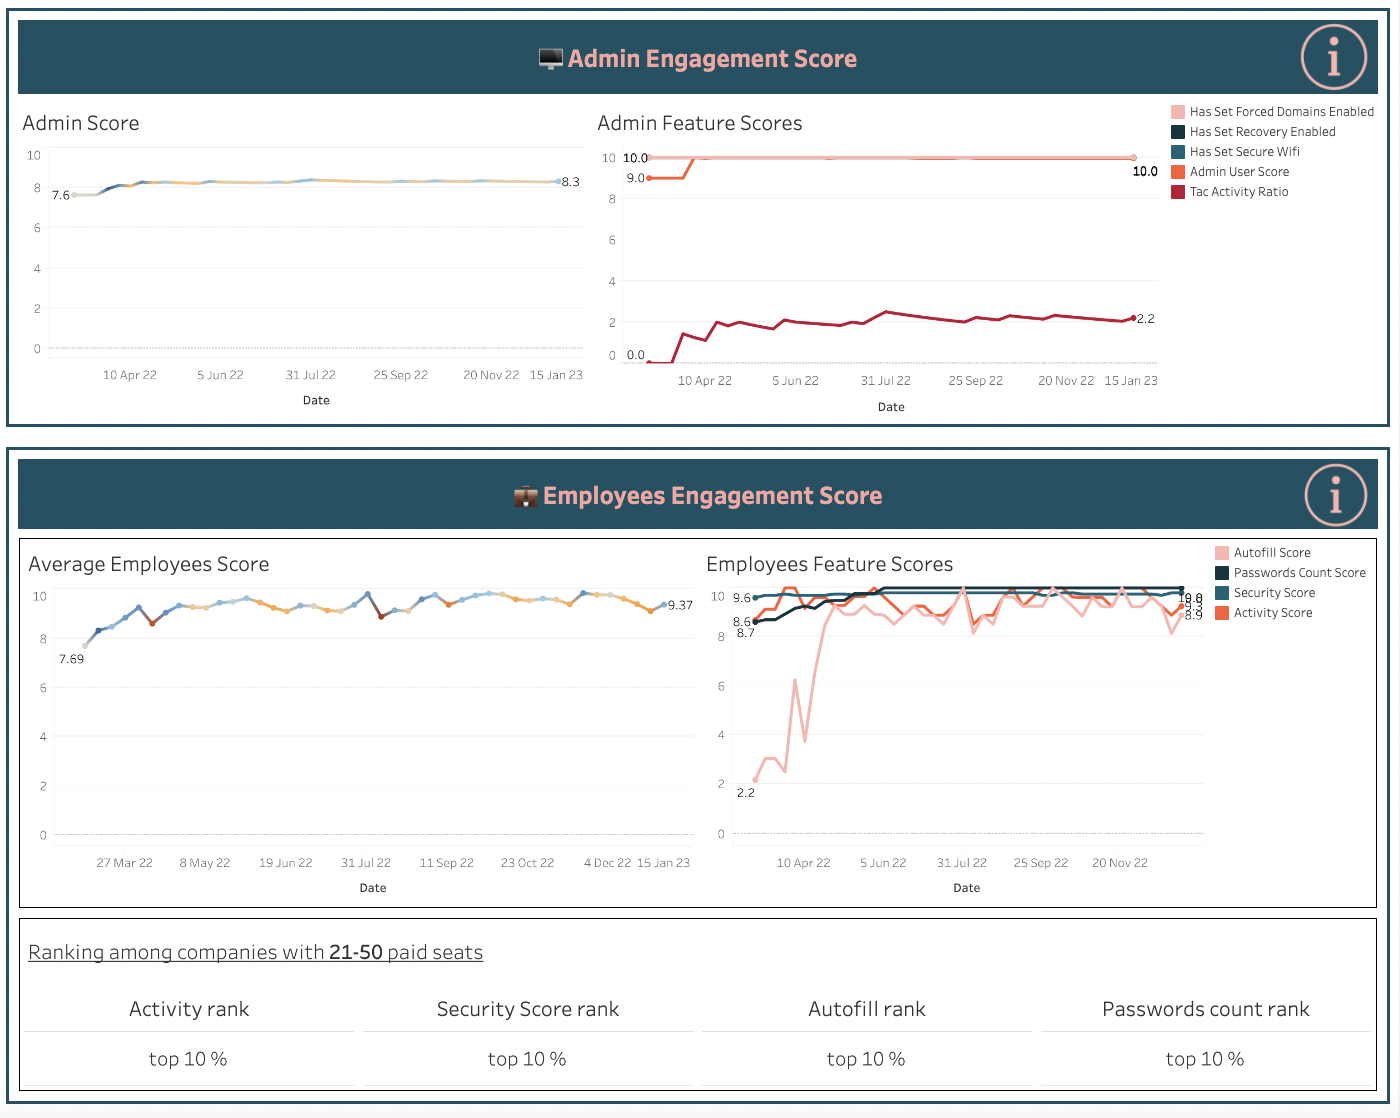 Graphs in the product data section representing Admin and Employees Engagement Scores and components. Under “Admin Engagement Score,” two graphs show the Admin Score and the Admin Feature Scores with lines showing trends over time. Under “Employees Engagement Score,” two graphs show the Average Employees Score and Employees Features Score with lines showing trends over time.